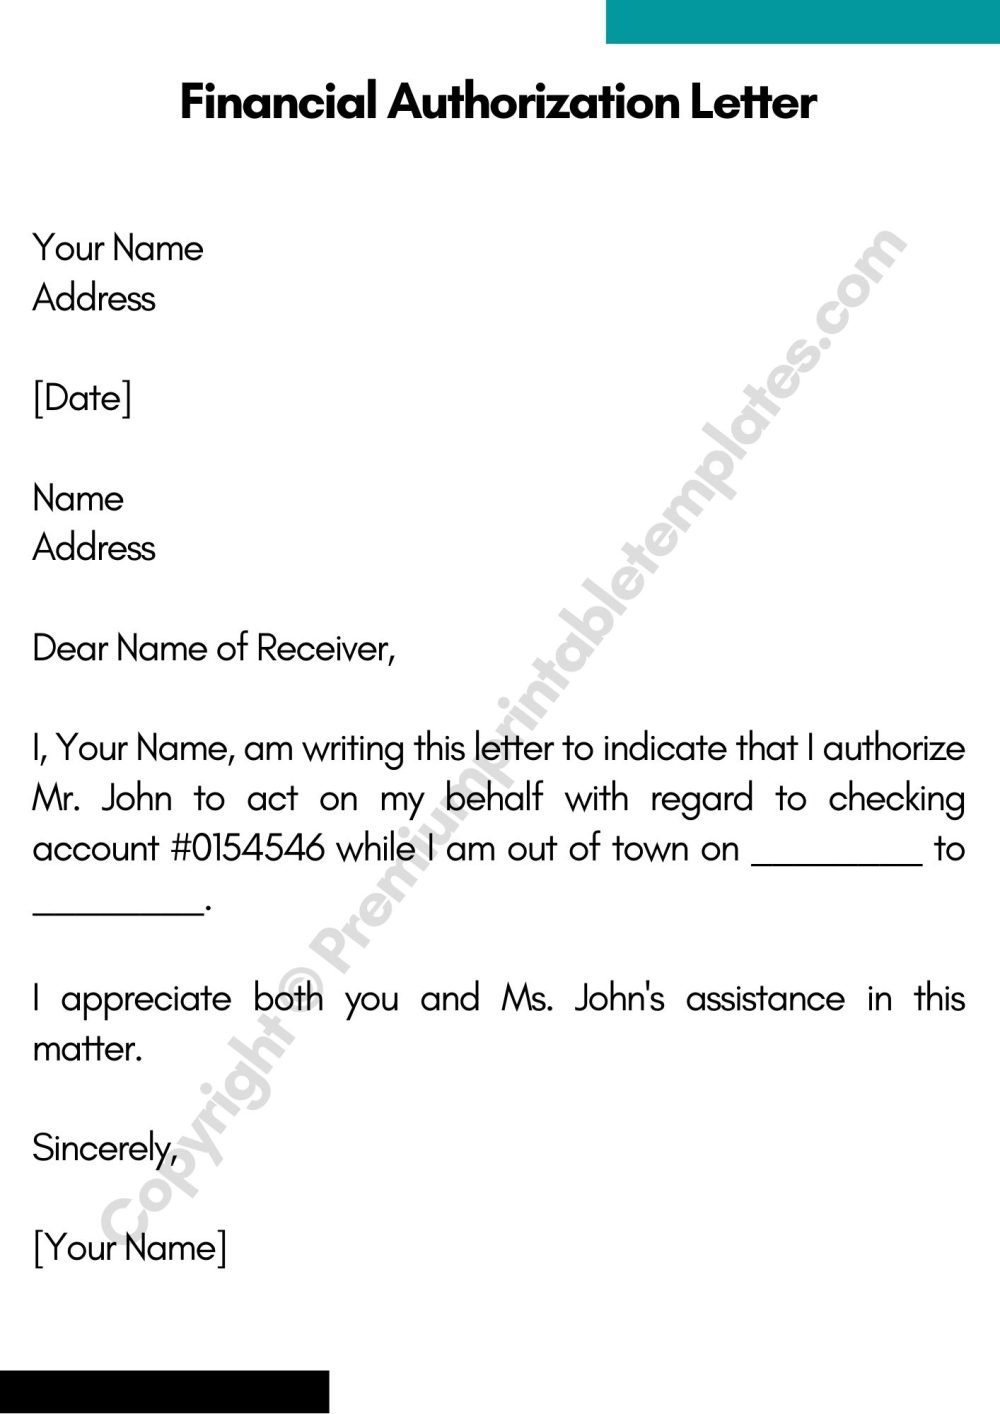 Financial Authorization Letter Template